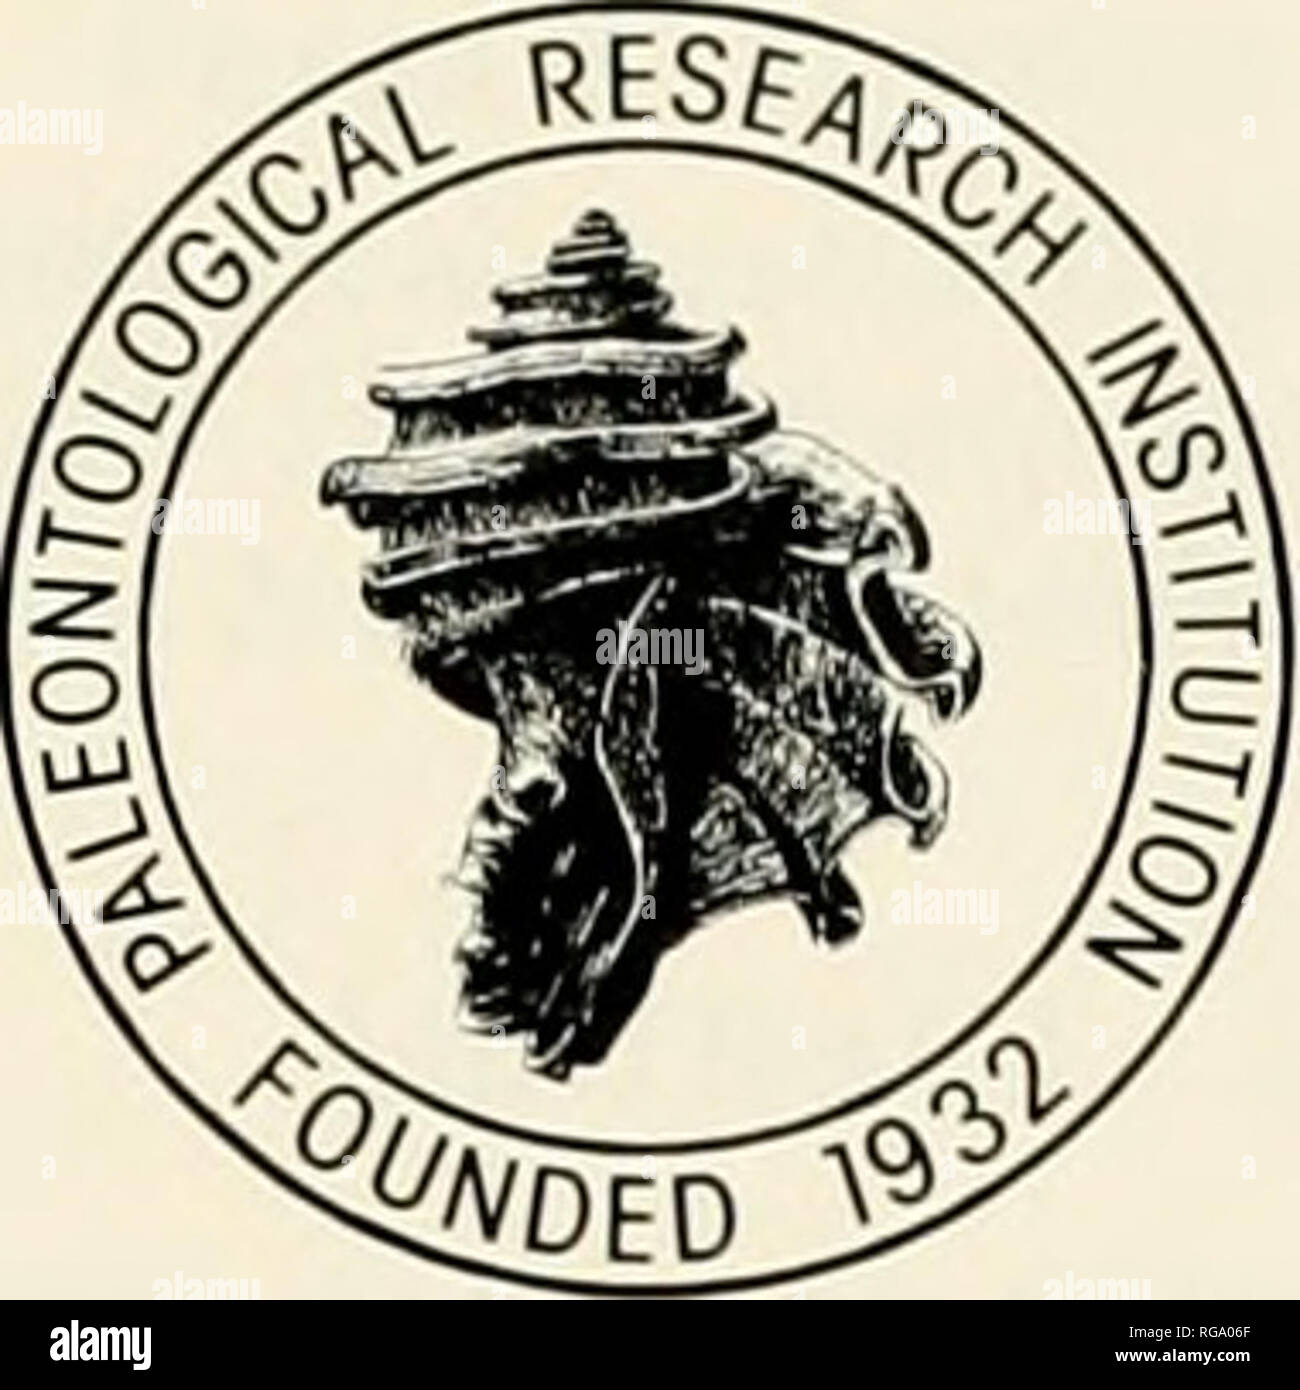 . Bulletins of American paleontology. . The Paleontological Research Institution acknowledges with special thanks the contributions of the following individuals and institutions PATRONS ($1000 or more at ihe discretion of the contributor} Armand L. Adams (1976) James A. Allen (1967) American Oil Company (1976) Atlantic Richfield Company (1978) Miss Ethel Z Bailey (1970) Christina L. Balk (1970) Mr. &amp; Mrs. Kenneth E. Caster (1967) Chevron Oil Company (1978) Exxon Company (1977 to date) Lois S. Fogelsanger (1966) Gulf Oil Corporation (1978) Merrill W. Haas (1975) Miss Rebecca S. Harris (1967 Stock Photo